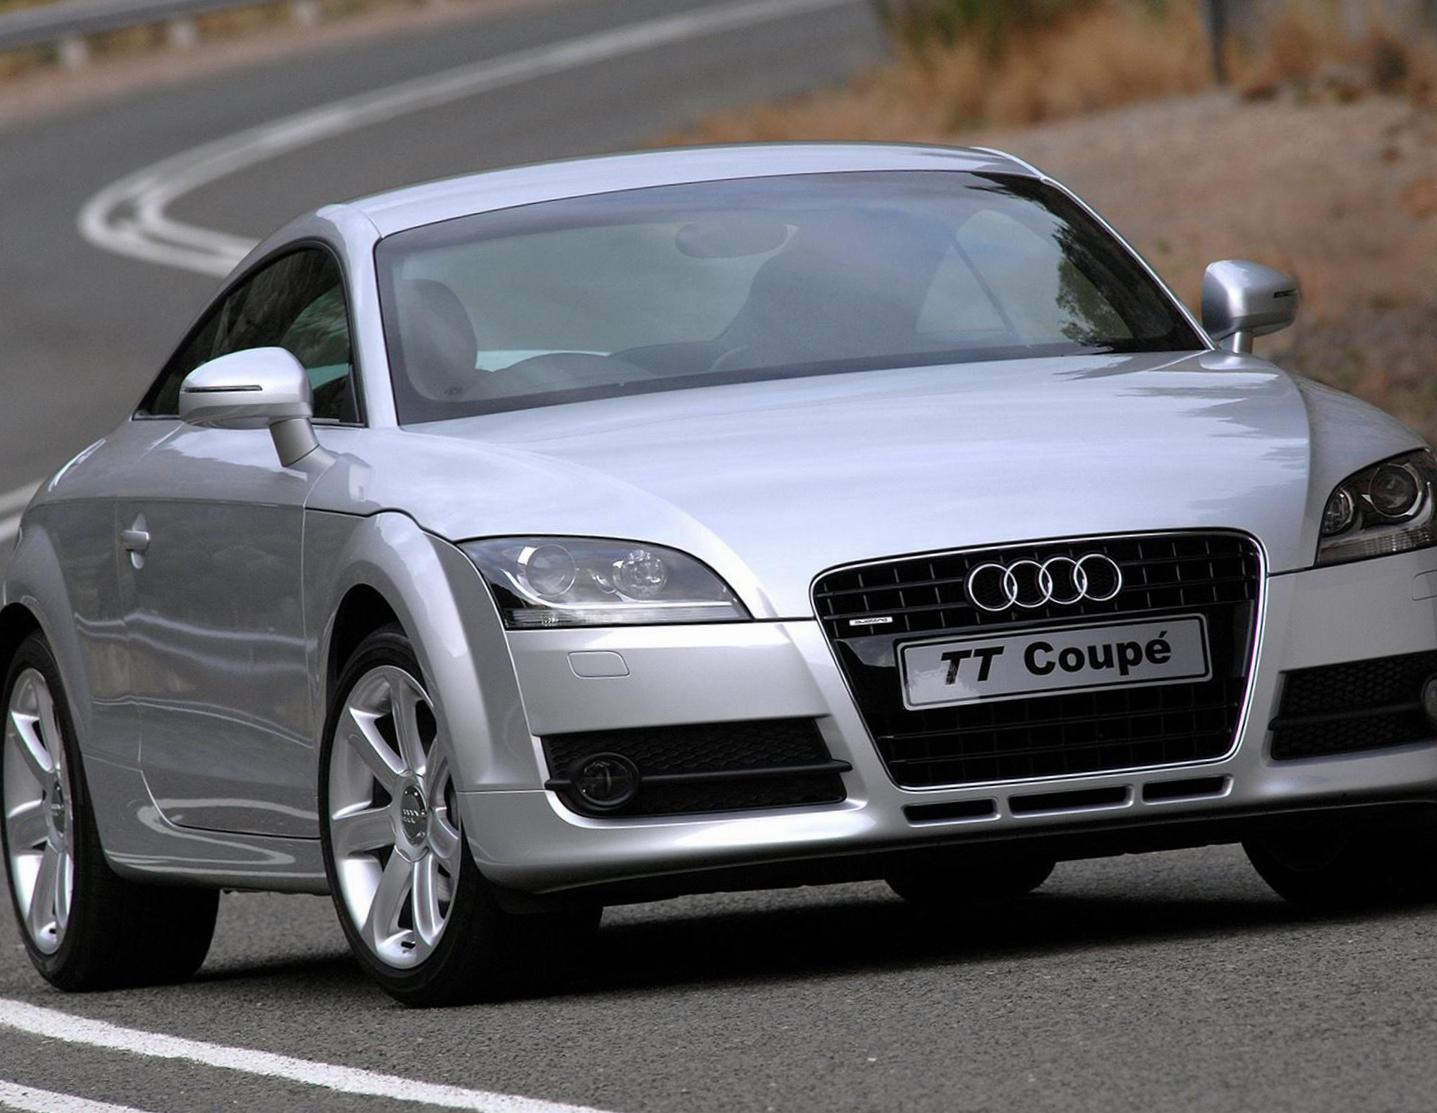 Audi TT Coupe for sale 2011